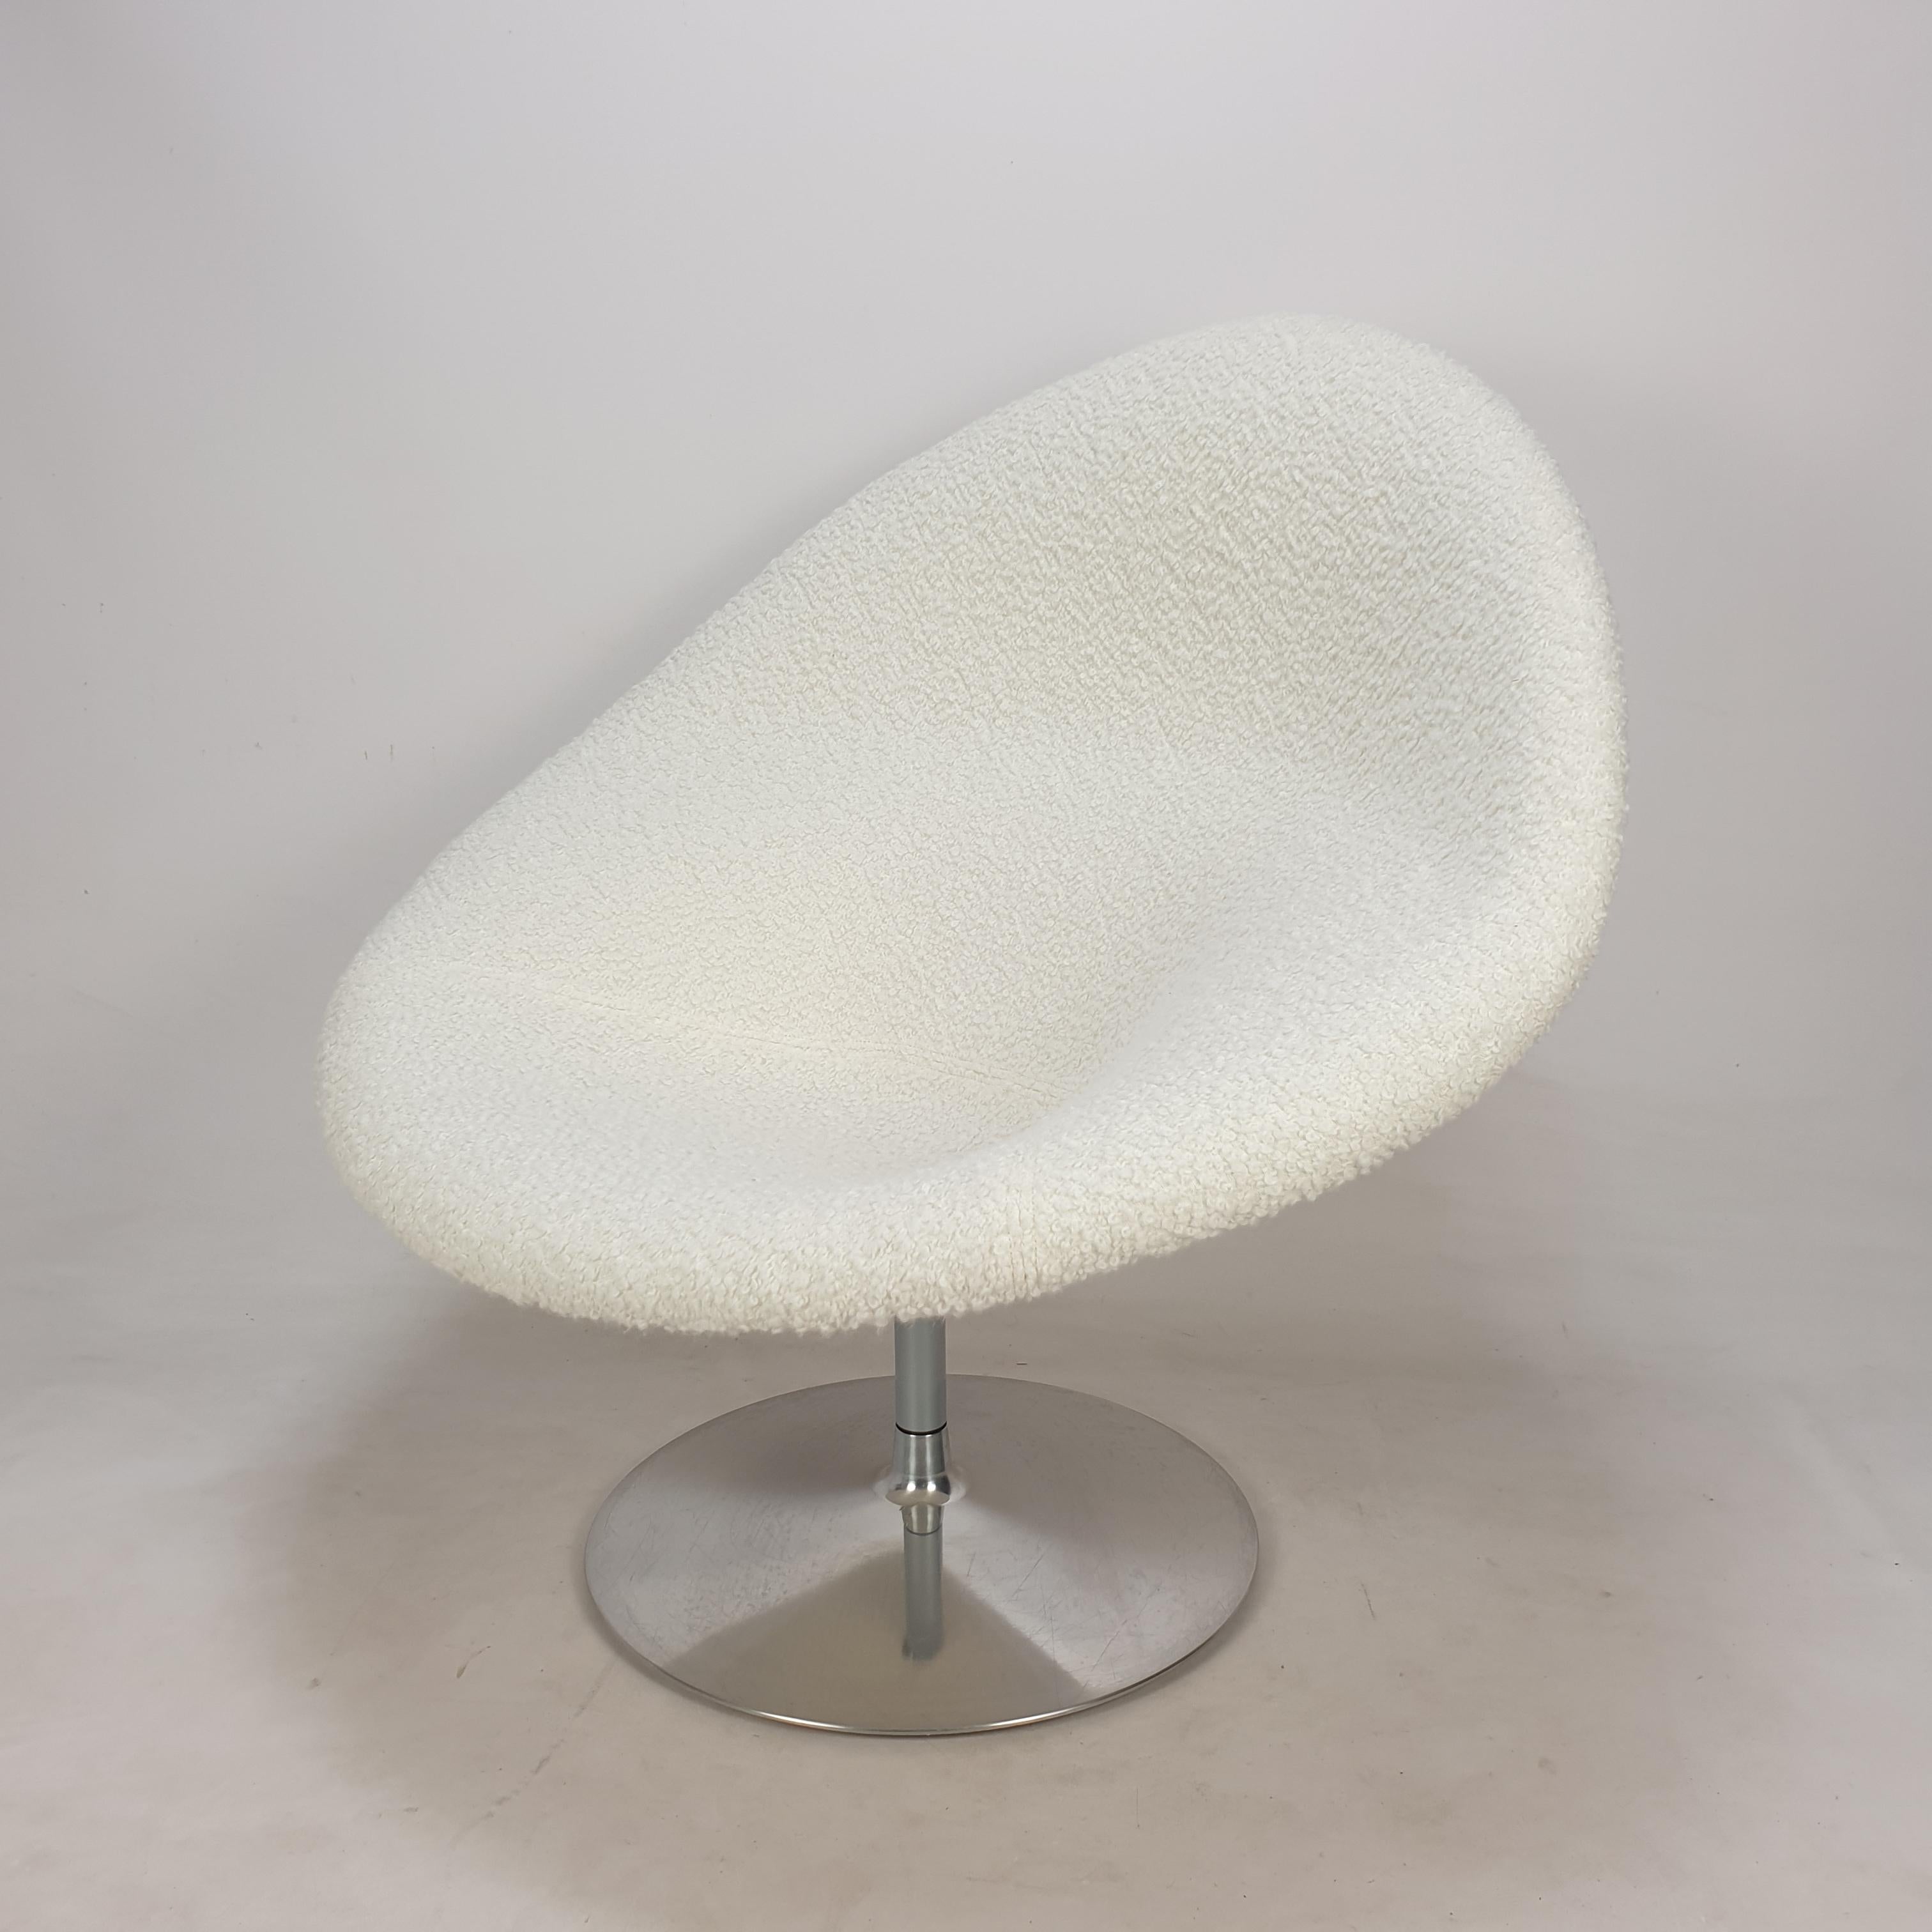 Very comfortable and turnable Big Globe Lounge Chair with Ottoman.
The Globe Chair is designed by Pierre Paulin for Artifort in 1959, this particular set is fabricated in the 80's.

The chair is just reupholstered with stunning white Alpaca